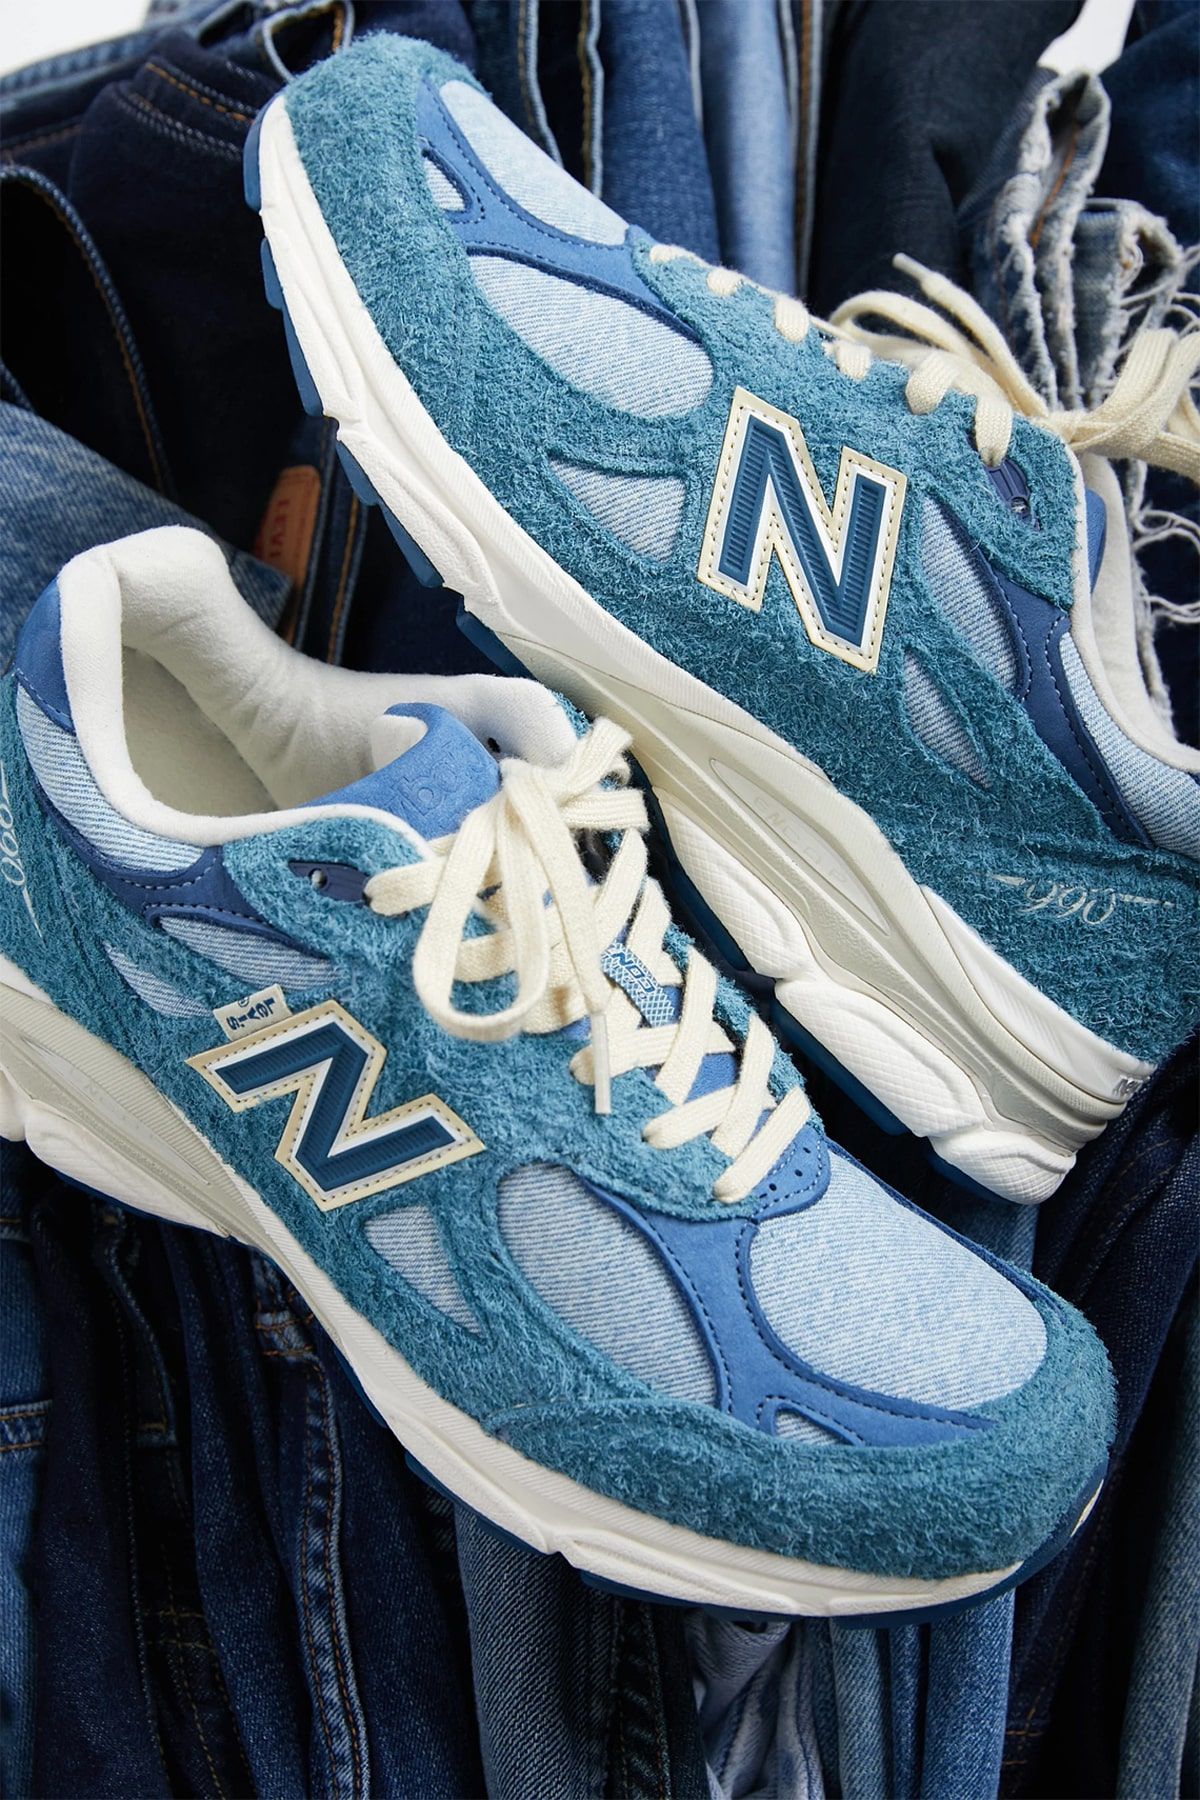 Levi's x New Balance 990v3 Pack Drops September 9th | House of Heat°